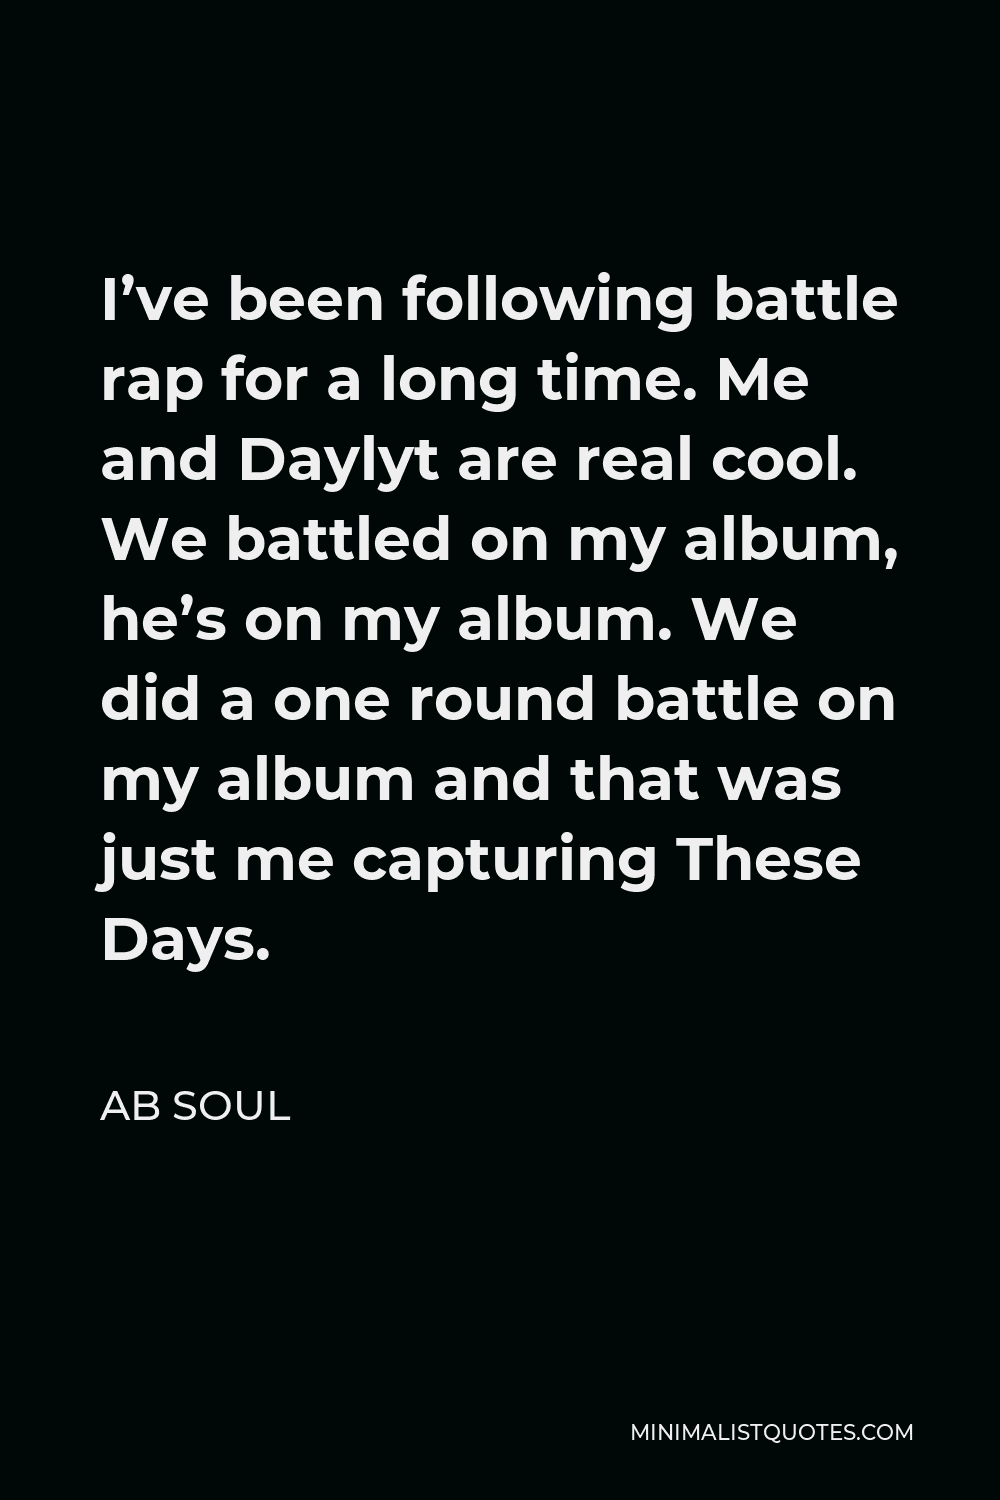 AB Soul Quote - I’ve been following battle rap for a long time. Me and Daylyt are real cool. We battled on my album, he’s on my album. We did a one round battle on my album and that was just me capturing These Days.